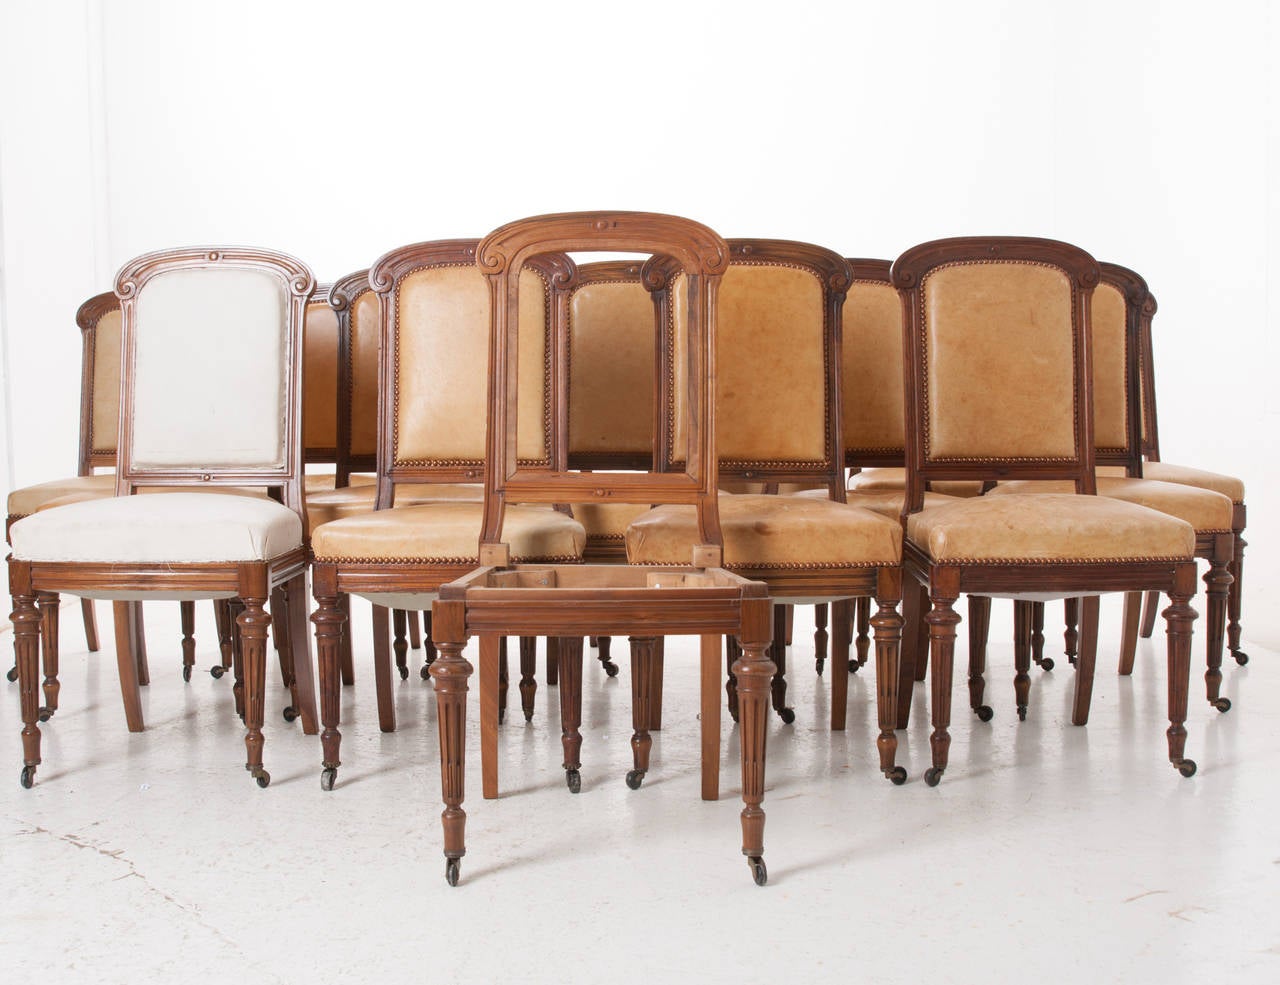 An amazing set of 16 carved walnut dining chairs all in excellent condition! Each chair has casters on the front two legs, an old dining chair tradition, for easily pulling a lady's chair out. The set has old upholstery and would need to be